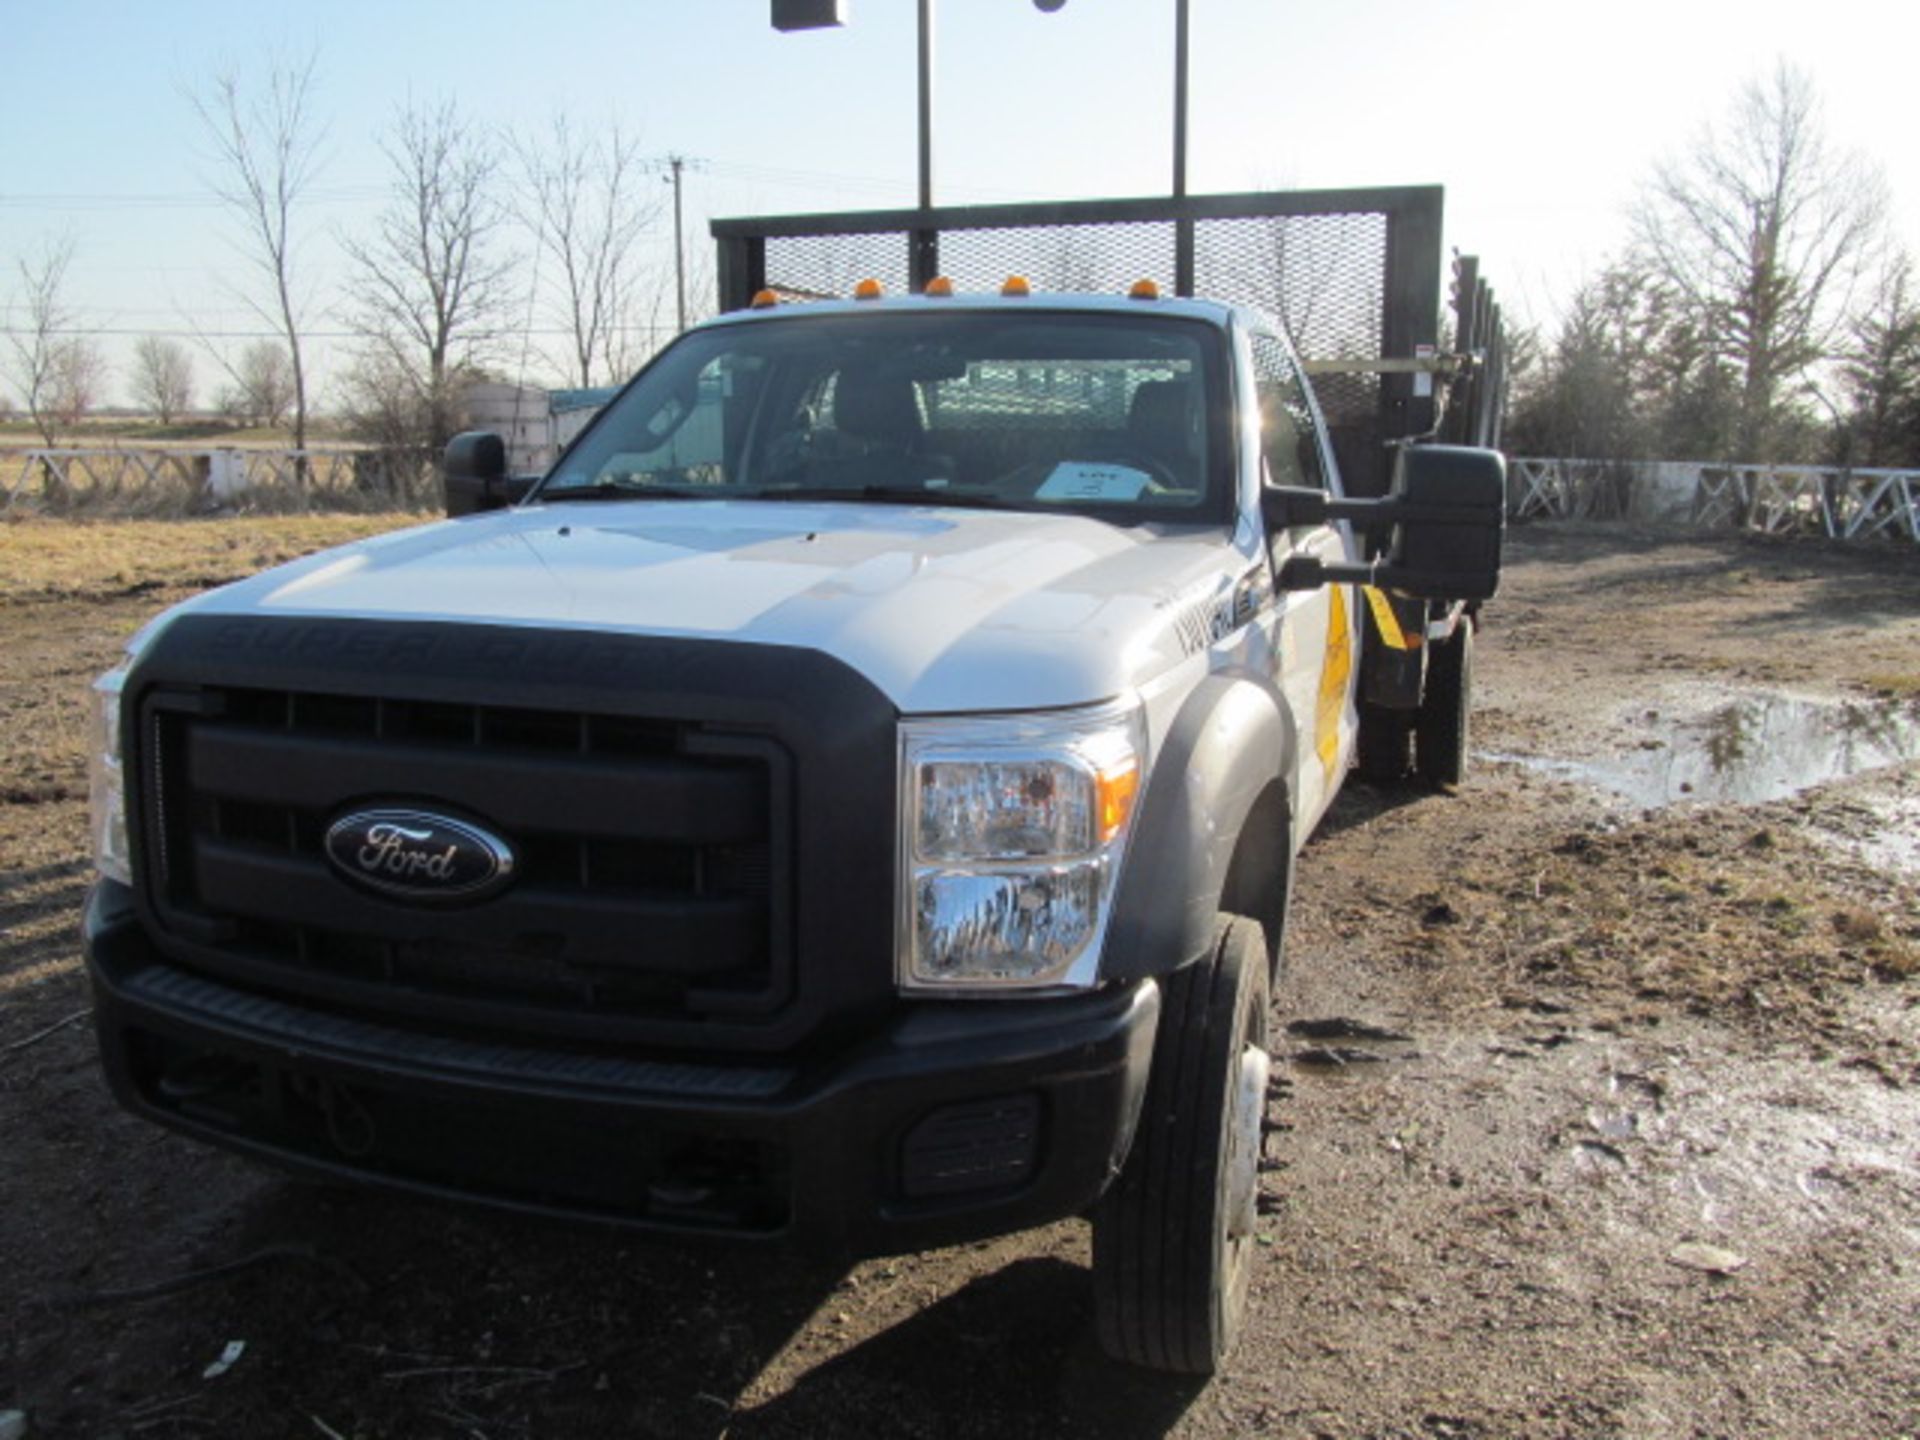 2012 Ford F450 Stakebed Truck with Lift Gate (VIN: 1FDUFGT0CEB54699) [Estimated Mileage: 105698. - Image 2 of 4